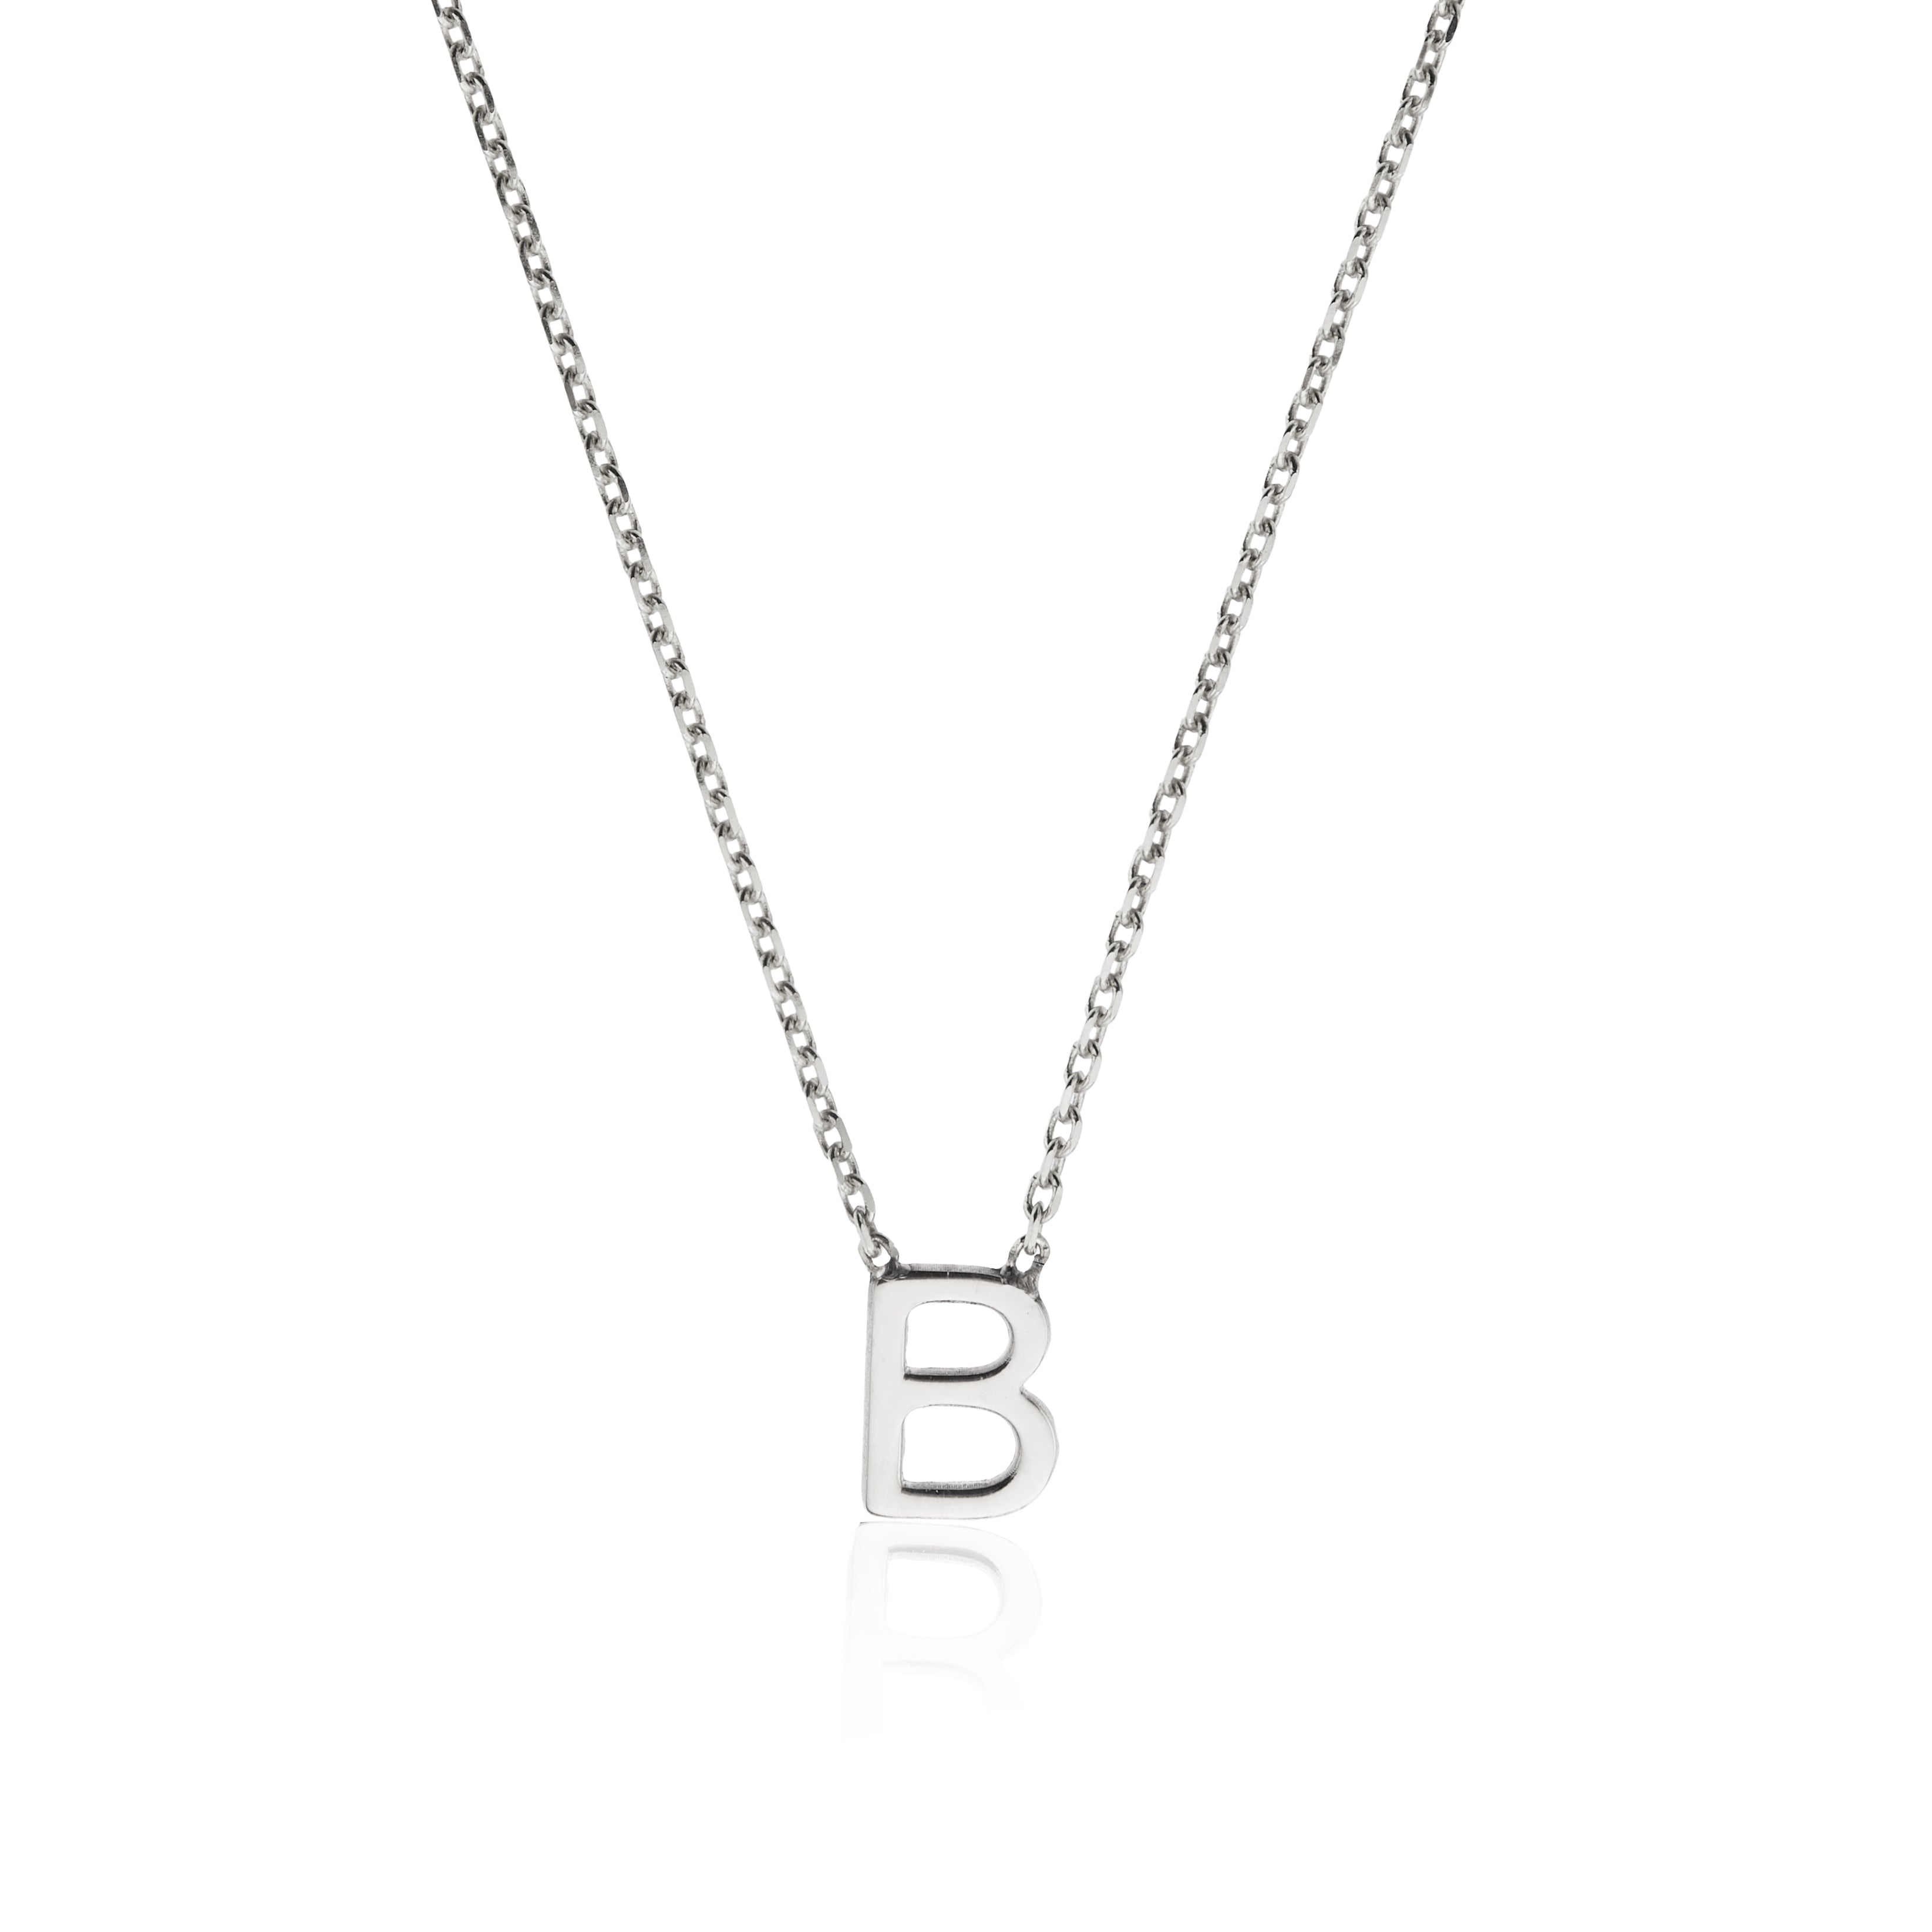 Solid White Gold Miniature Initial Letter Necklace